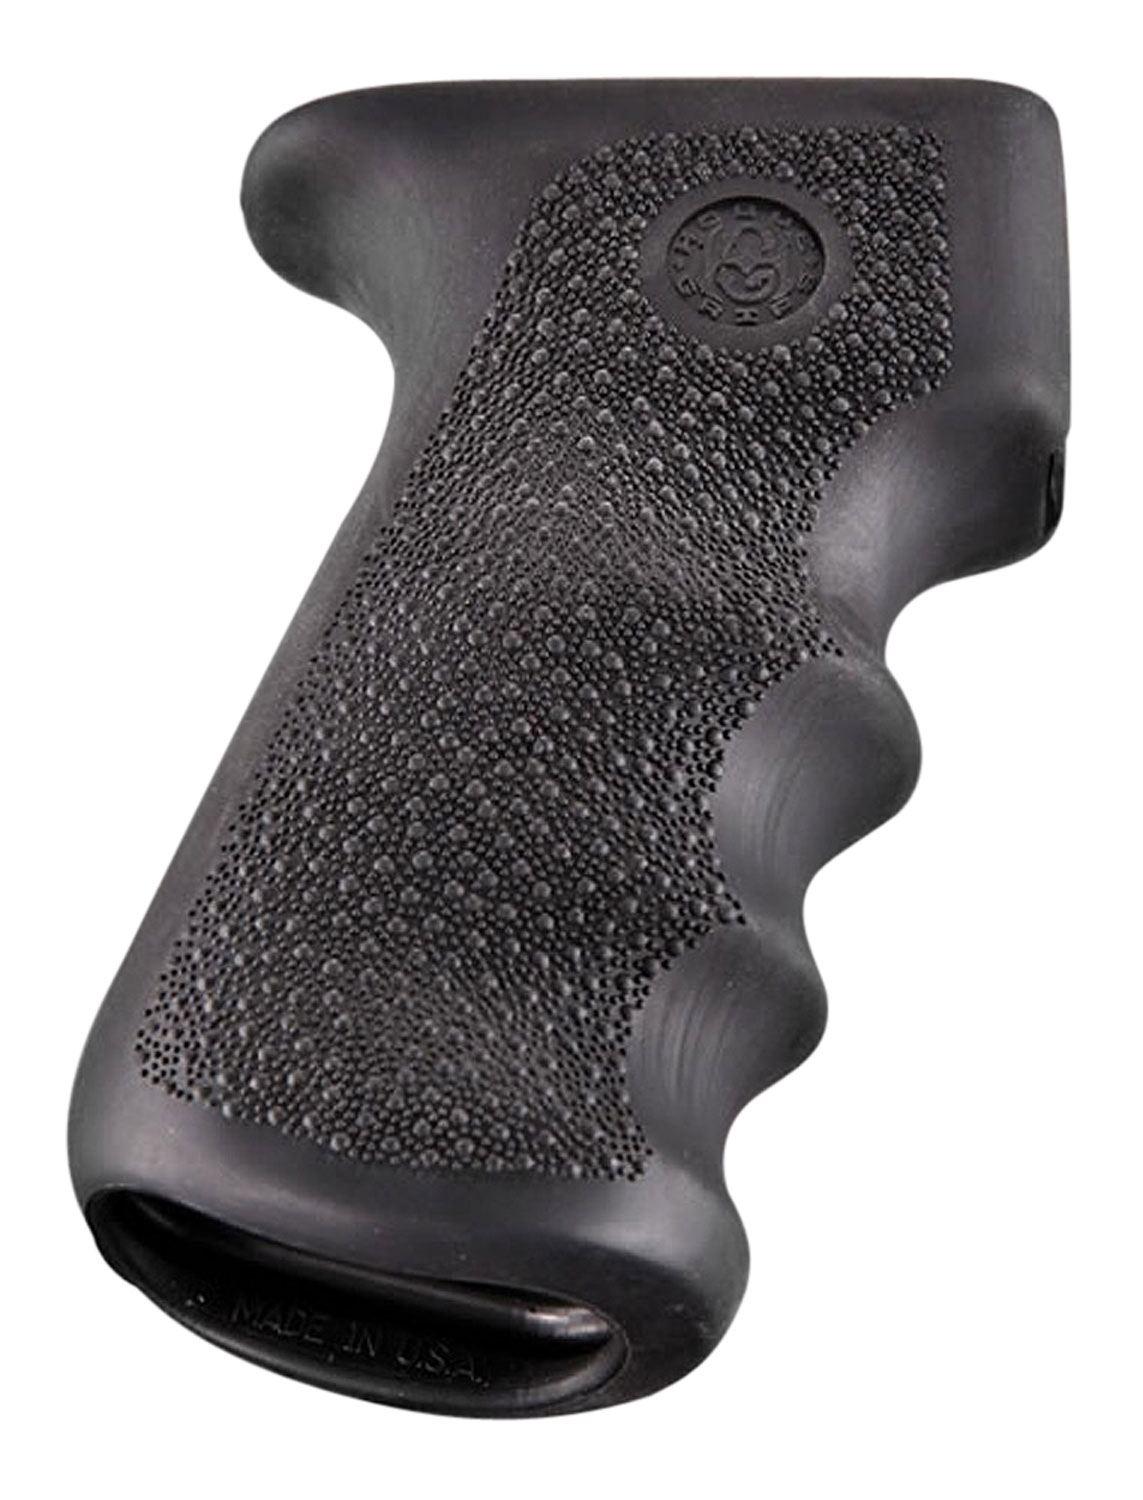 Hogue 74000 Rubber Grip  Cobblestone Black with Finger Grooves for AK-47, AK-74